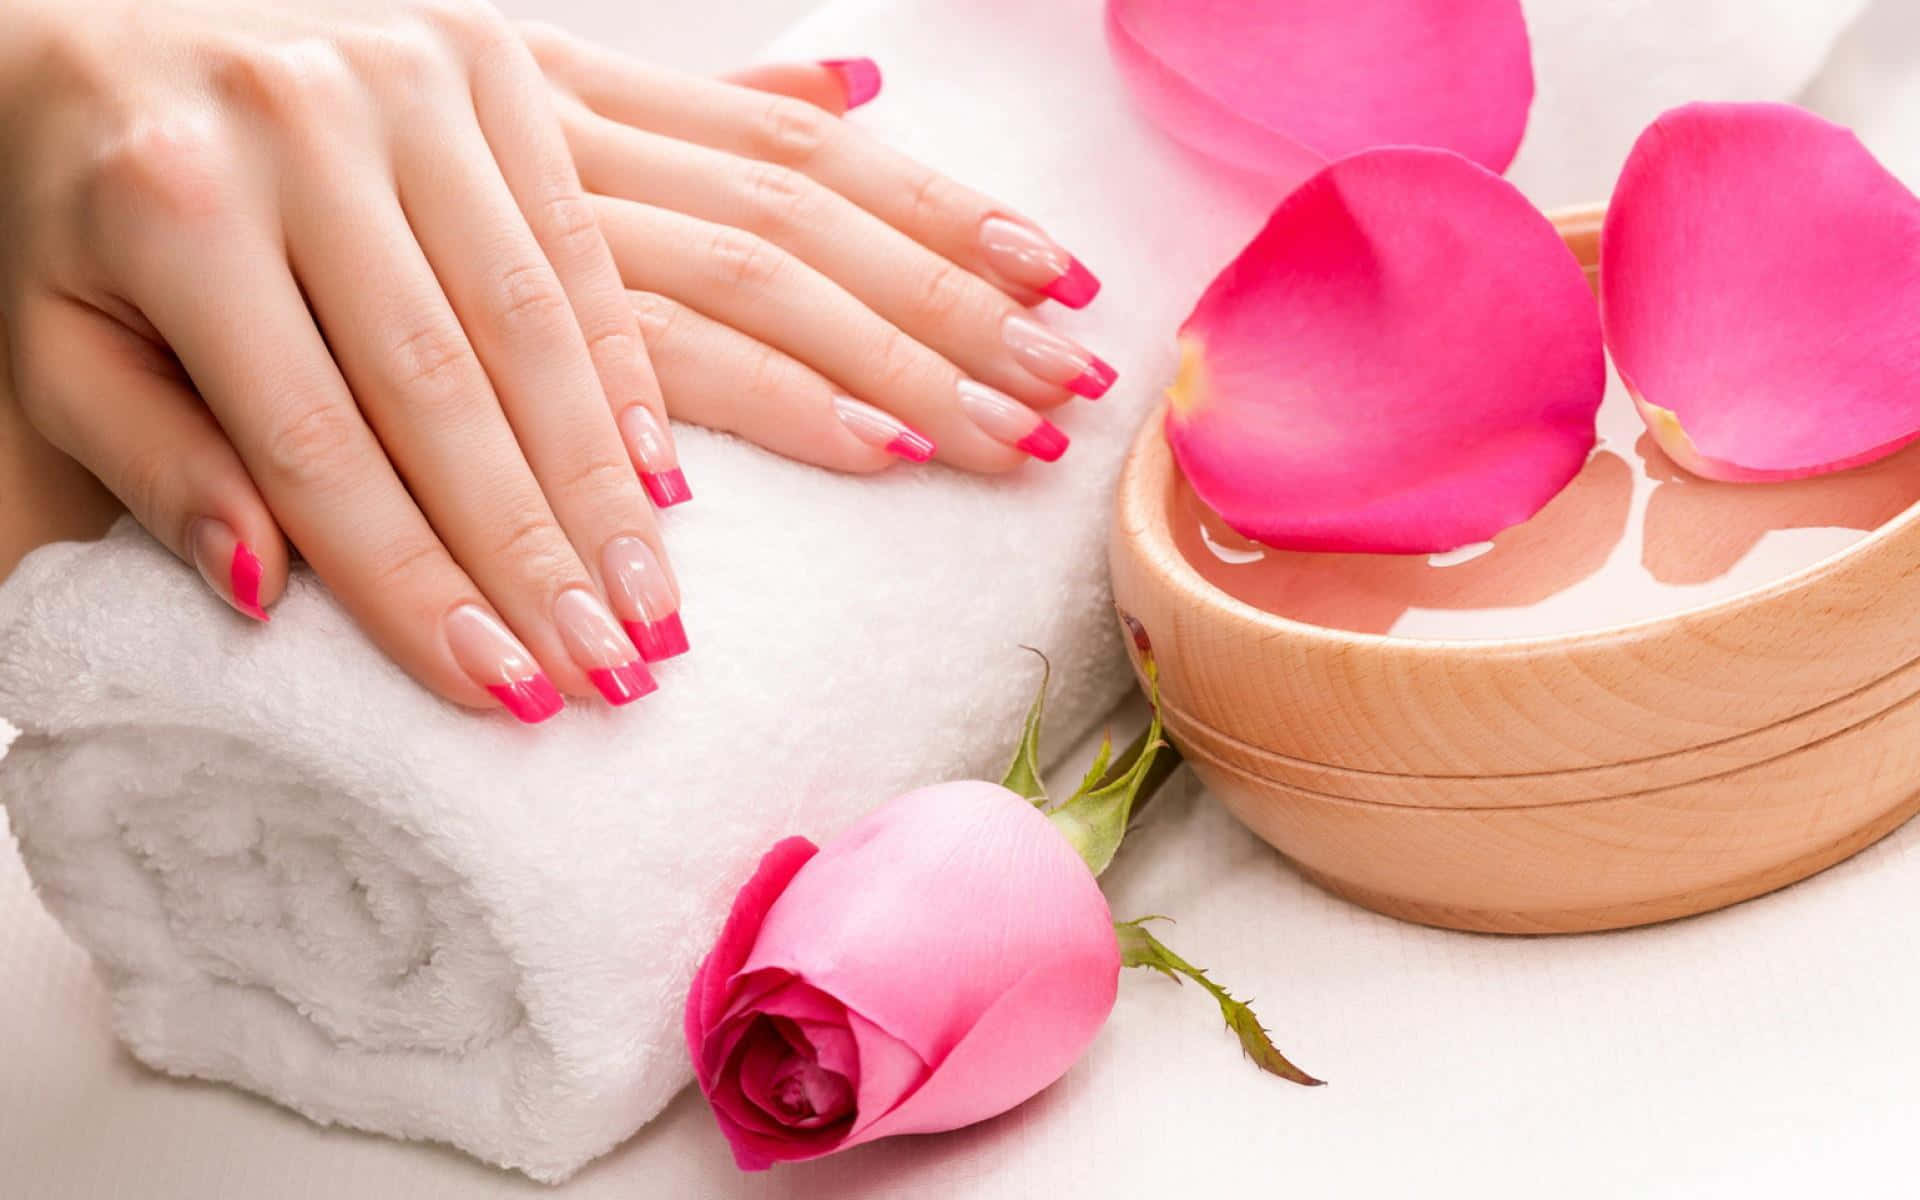 A Woman's Hands With Pink Nails And Roses On A Towel Wallpaper